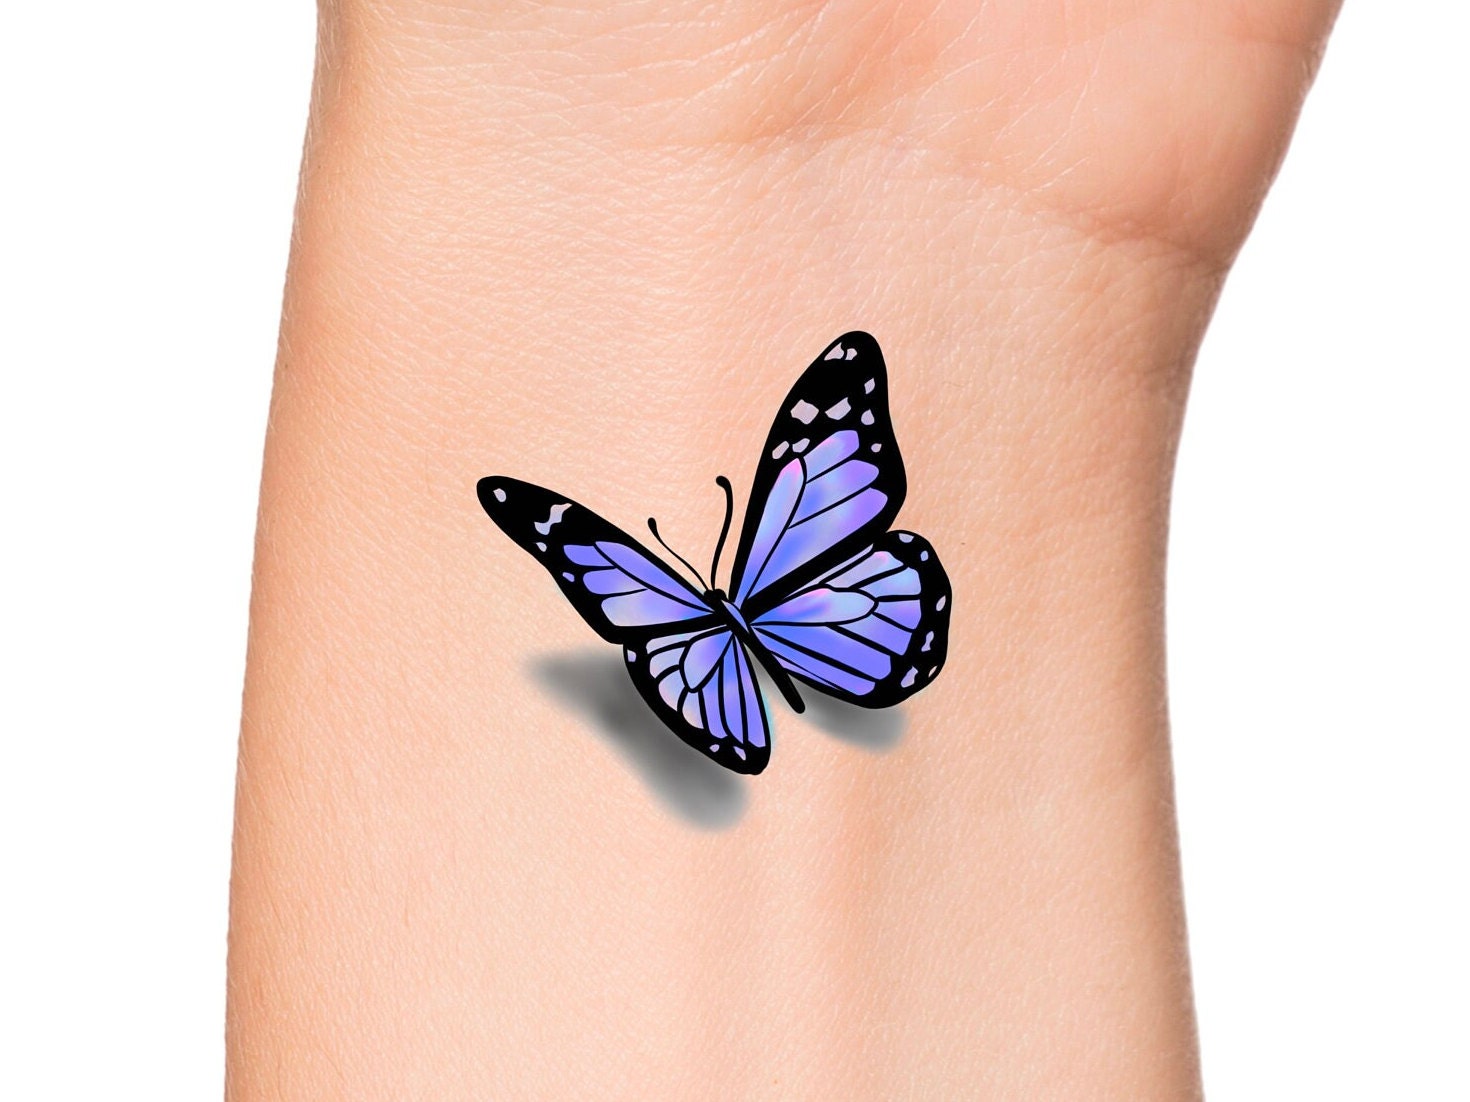 2 Butterfly Tattoo Ideas That Will Make You Want to Get Inked - wide 1